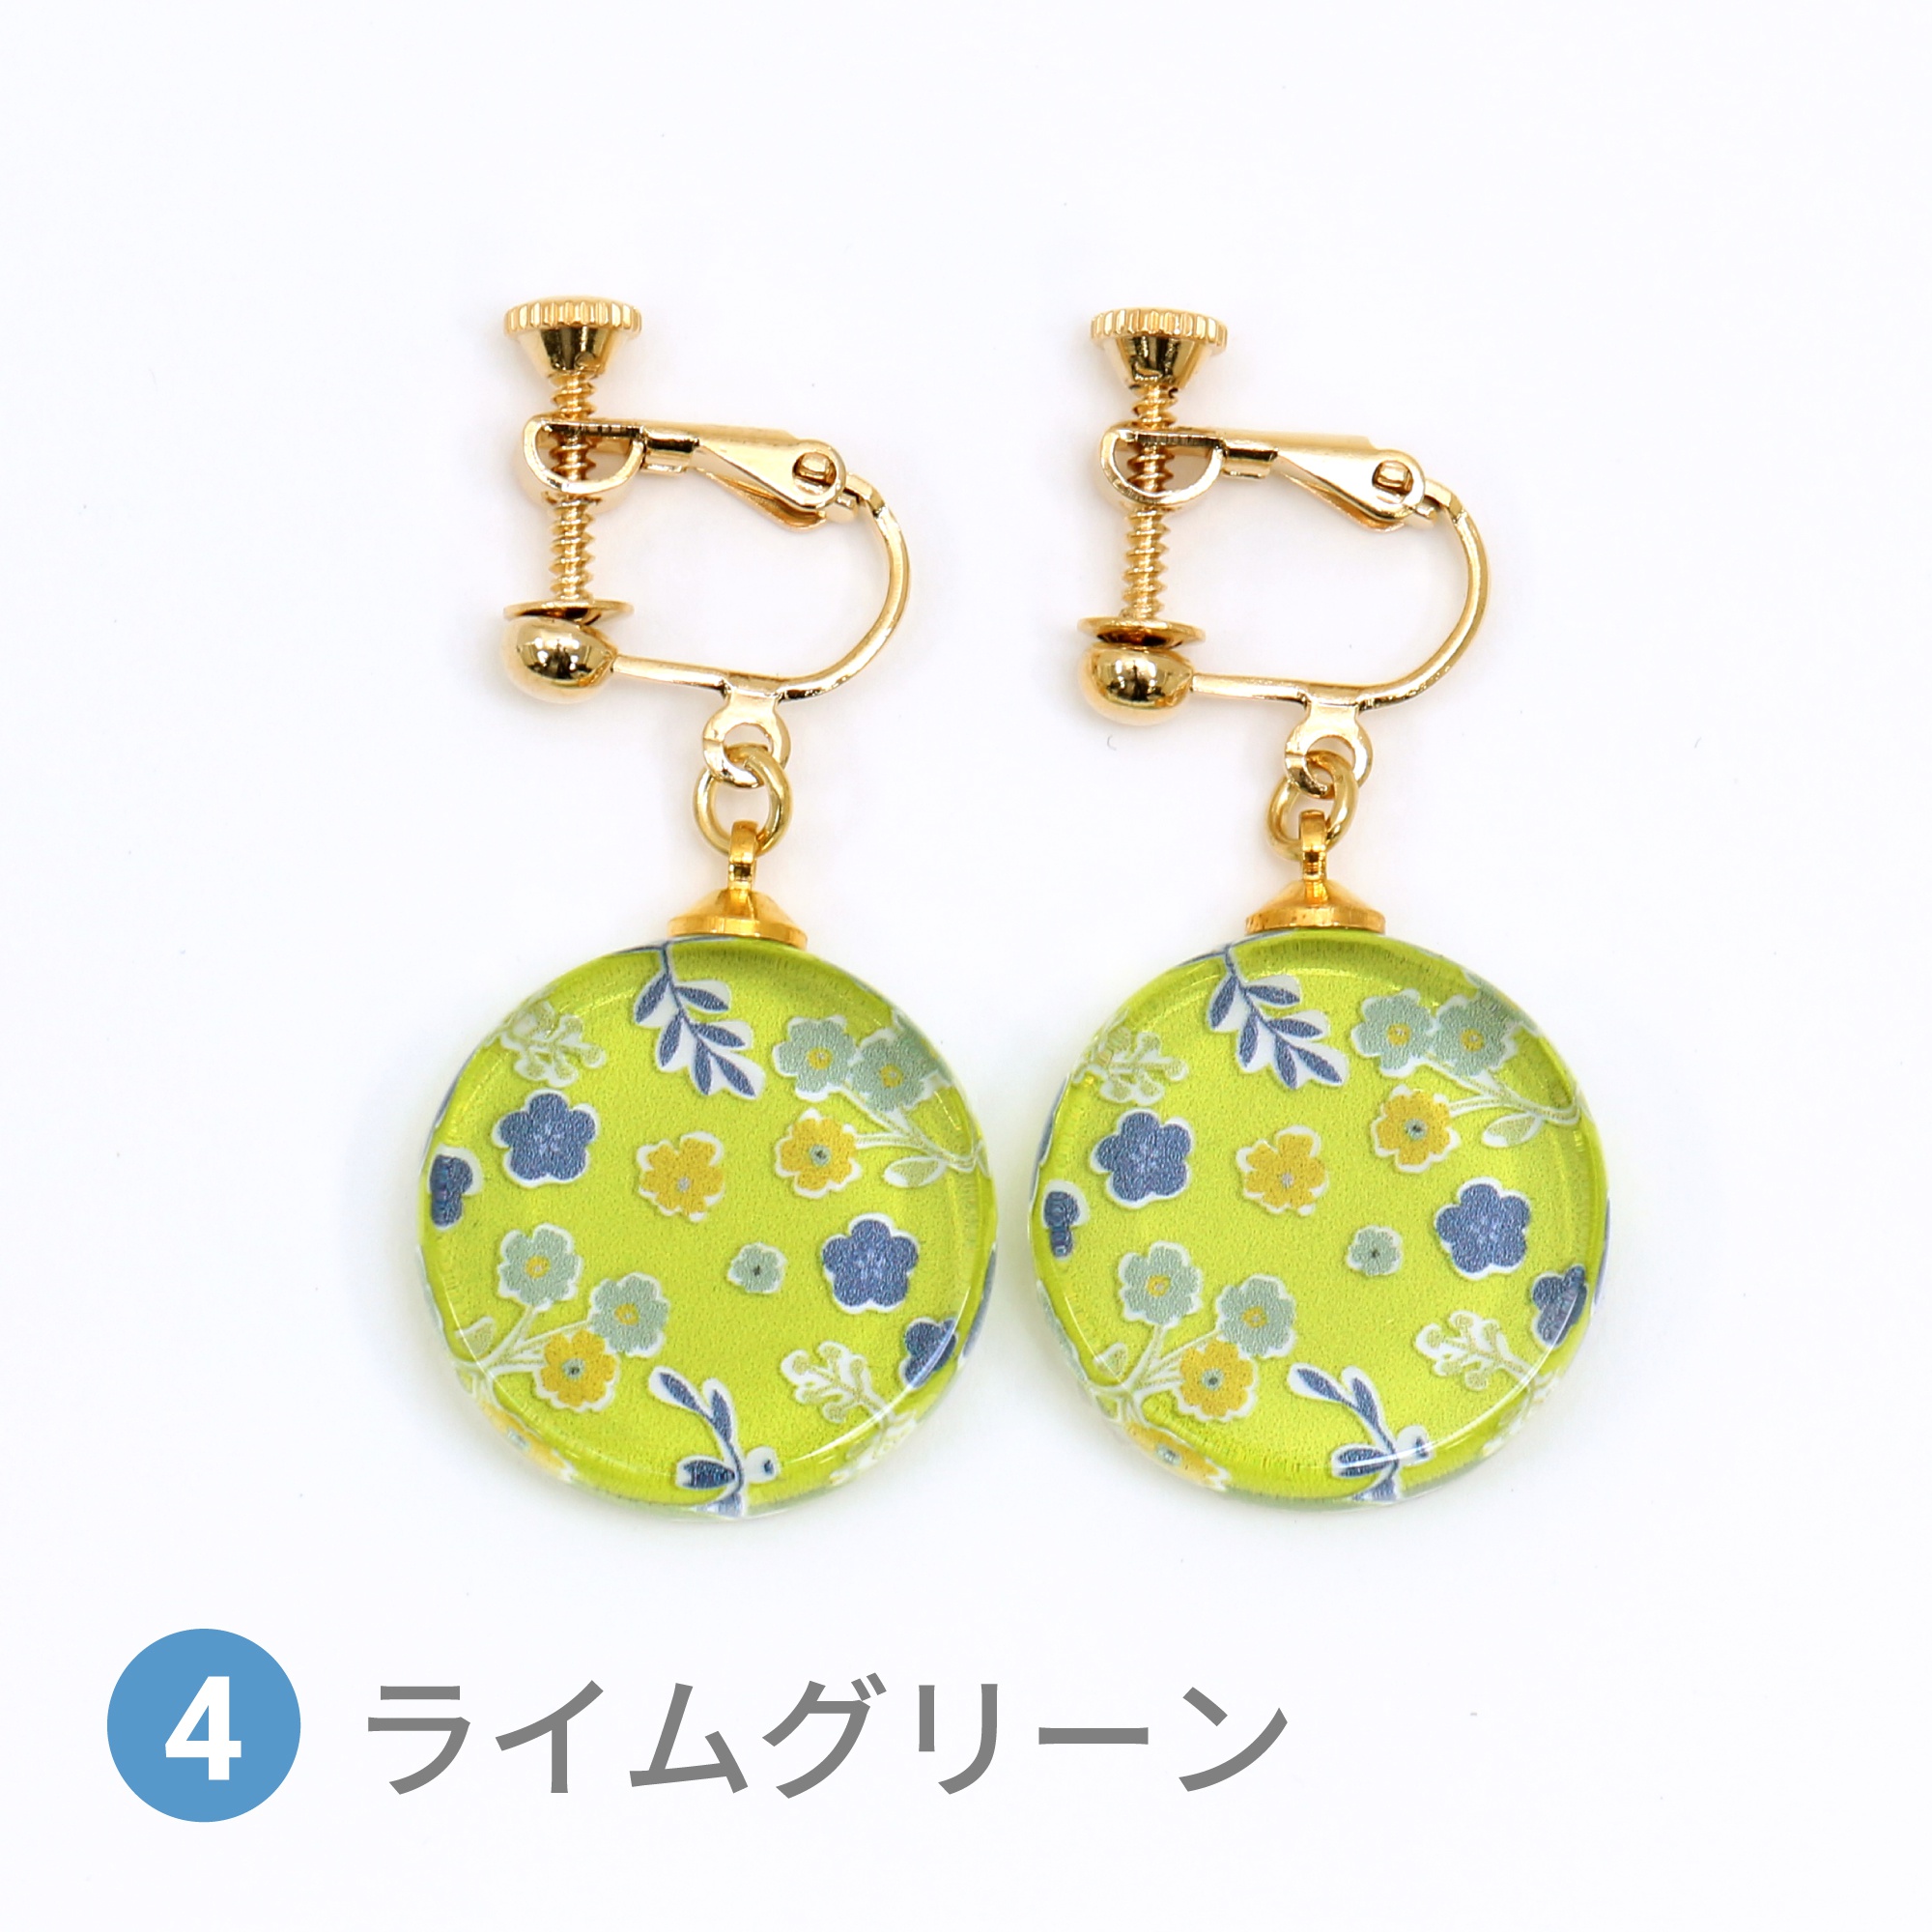 Glass accessories Earring FLORAL PATTERN lime green round shape